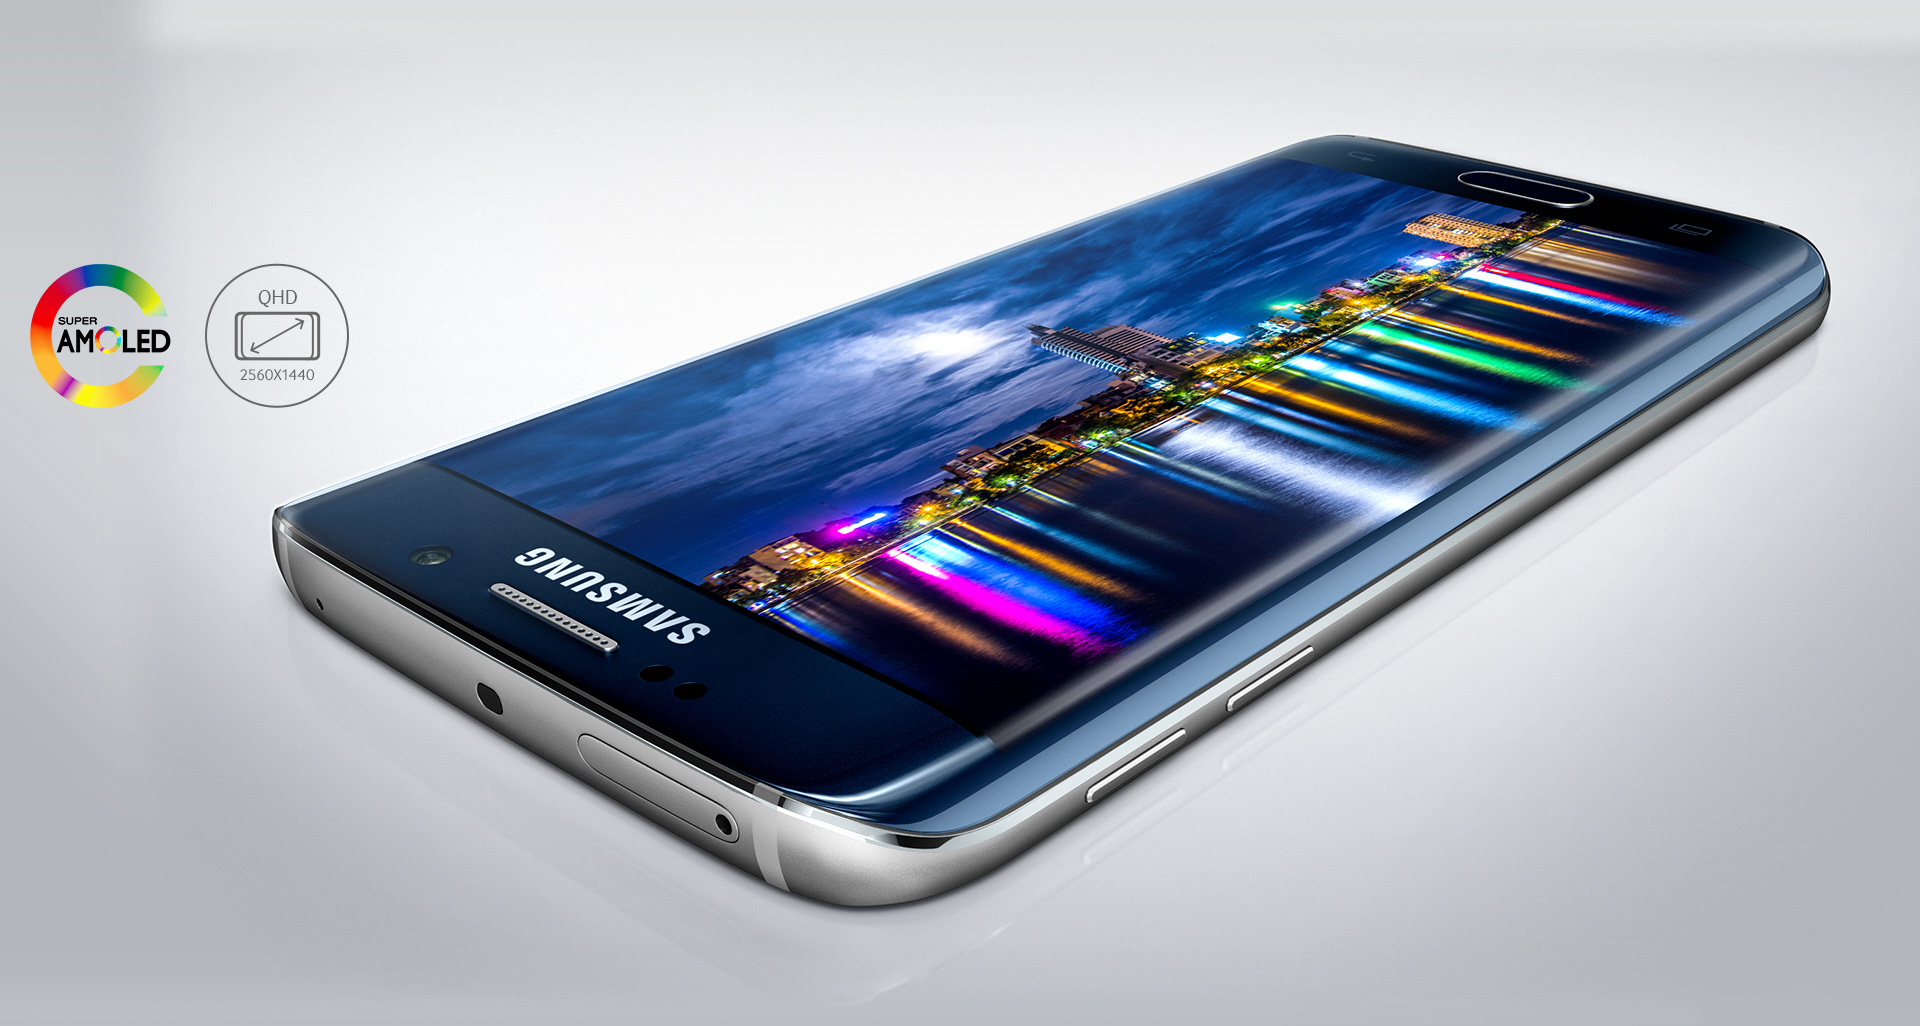 blik Toeval Gelukkig is dat Samsung Galaxy S6 Edge Plus to feature 4 GB of RAM and Exynos 7420 -  NotebookCheck.net News